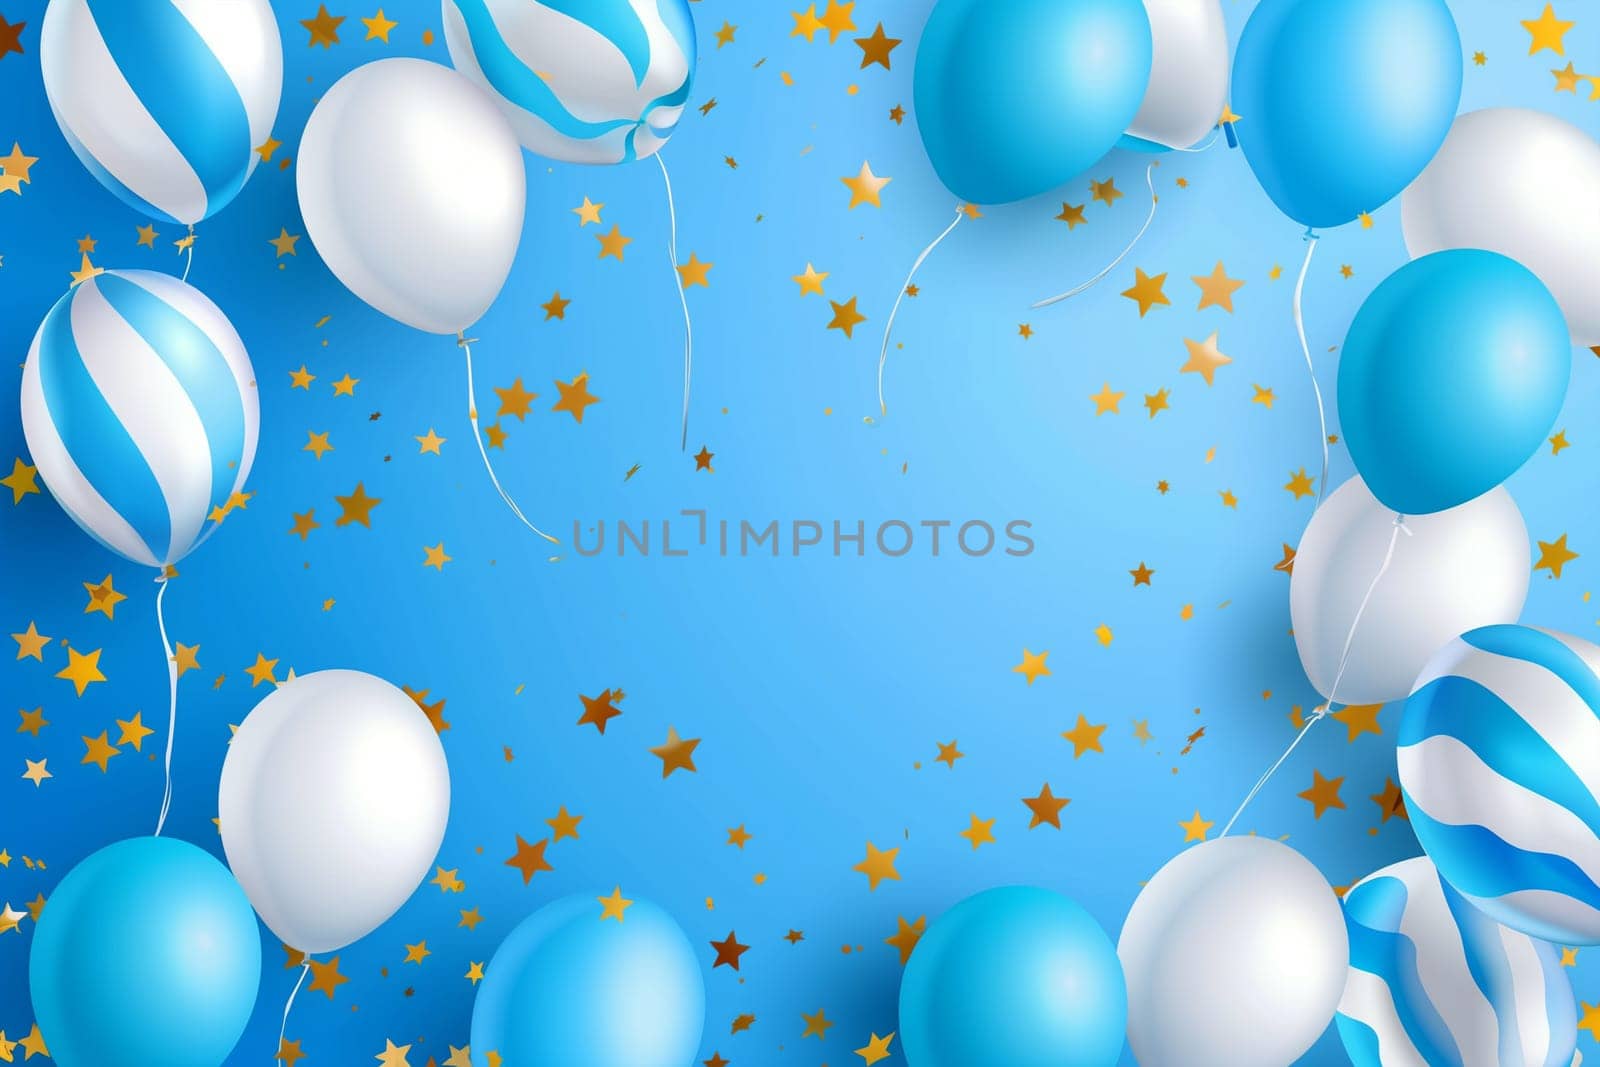 Blue and White Background With Balloons and Stars by Sd28DimoN_1976